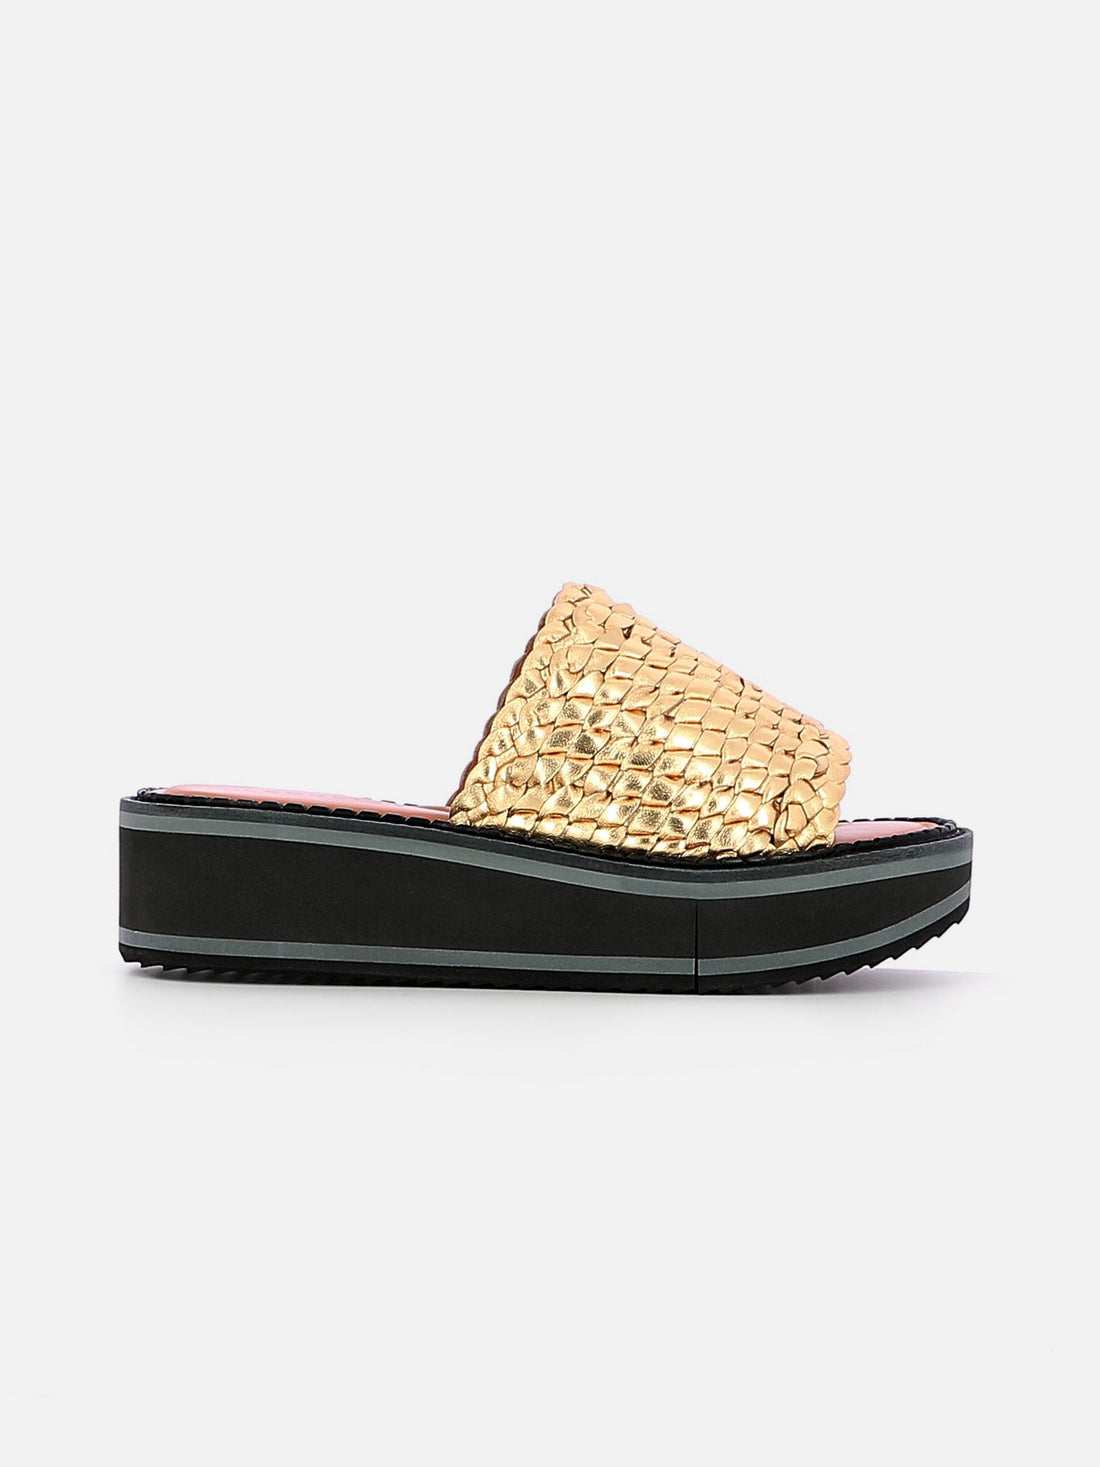 MULES - FABLE mules, gold nappa braid - 3606063964333 - Clergerie Paris - Europe